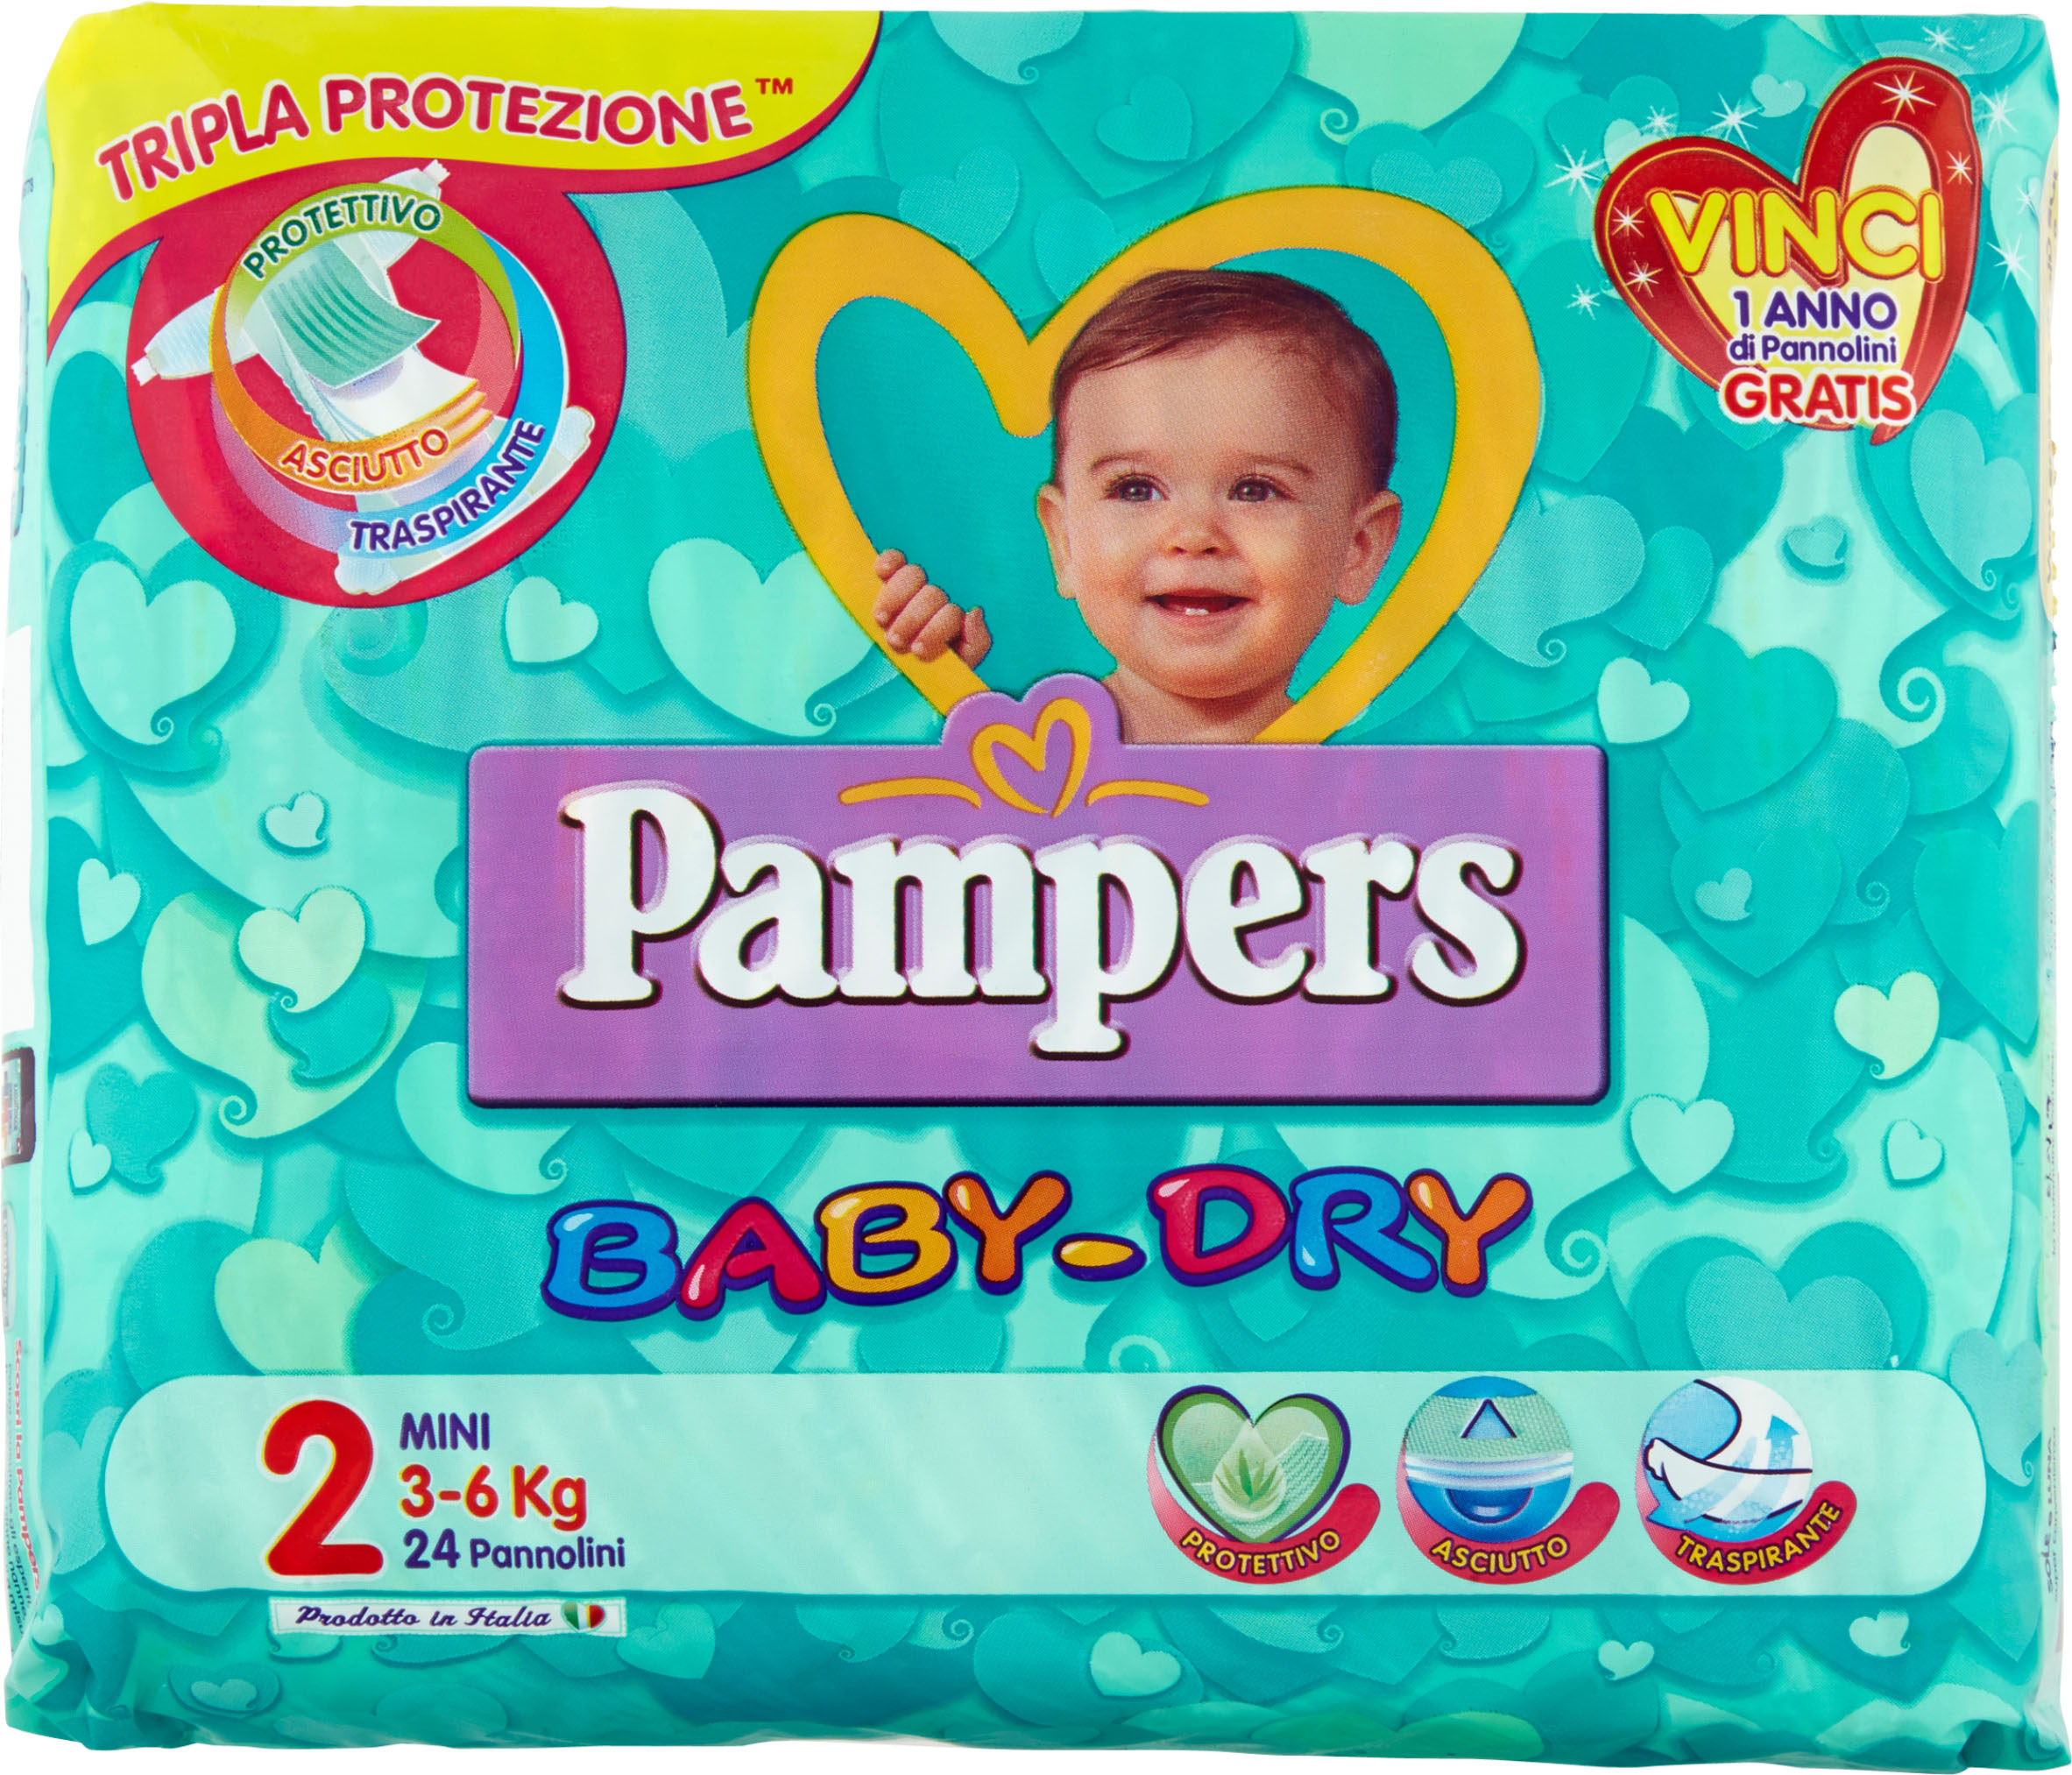 Image of Pannolino Baby Dry Downcount 2 Mini Pampers 24 Pezzi